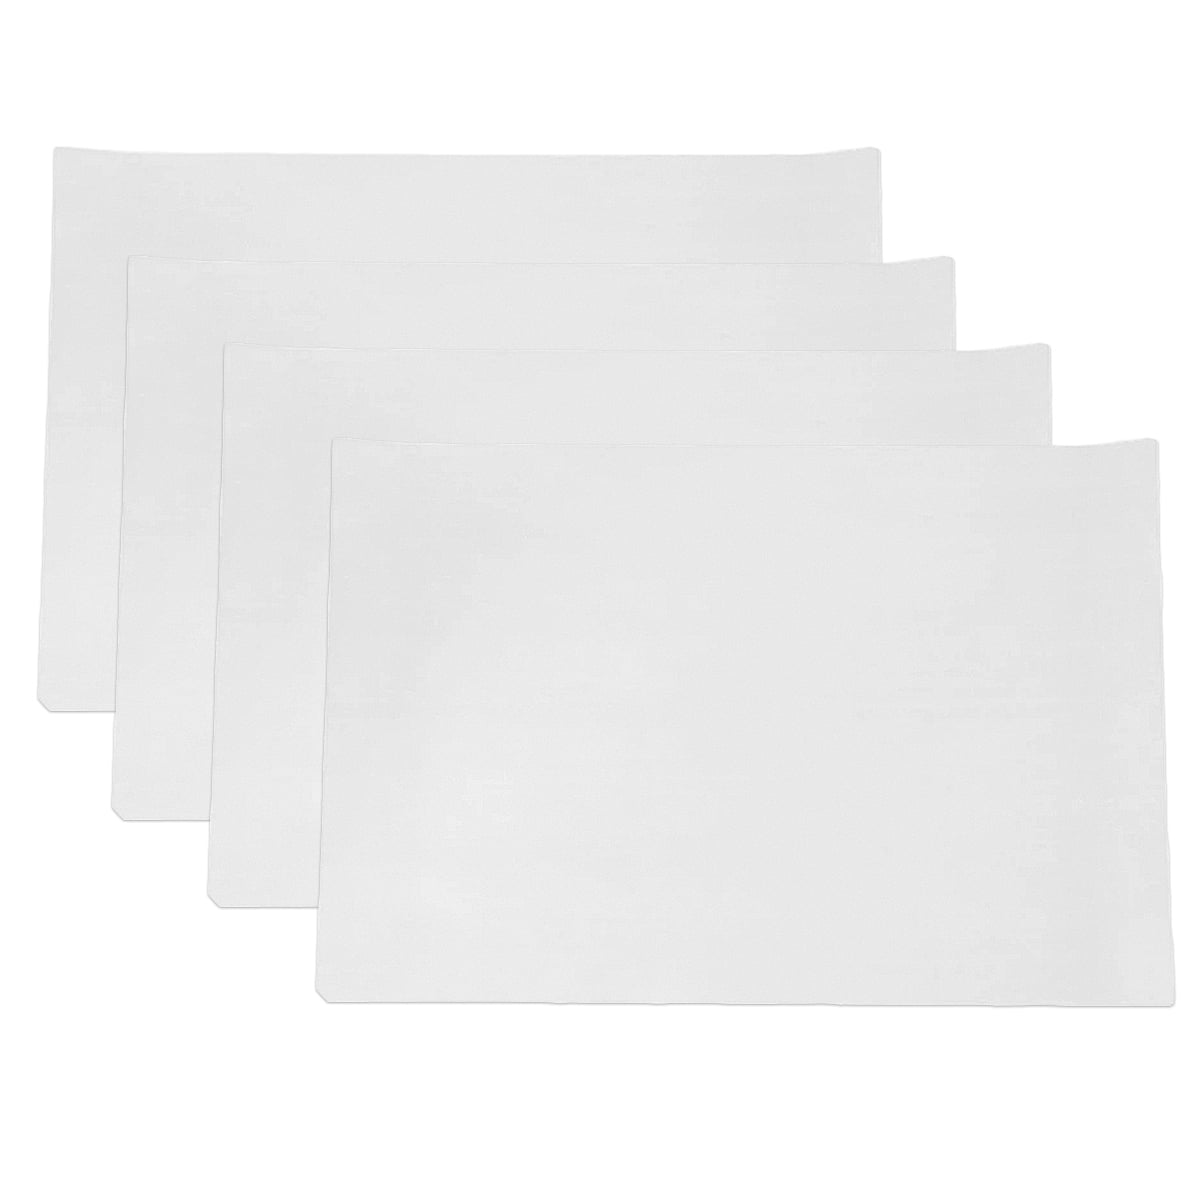 Wighamtex Reusable Teflon Sheets for Heat Press 16 x 20 inch Non Stick Heat  Resistance Crafting Mat, 4 Pack, White